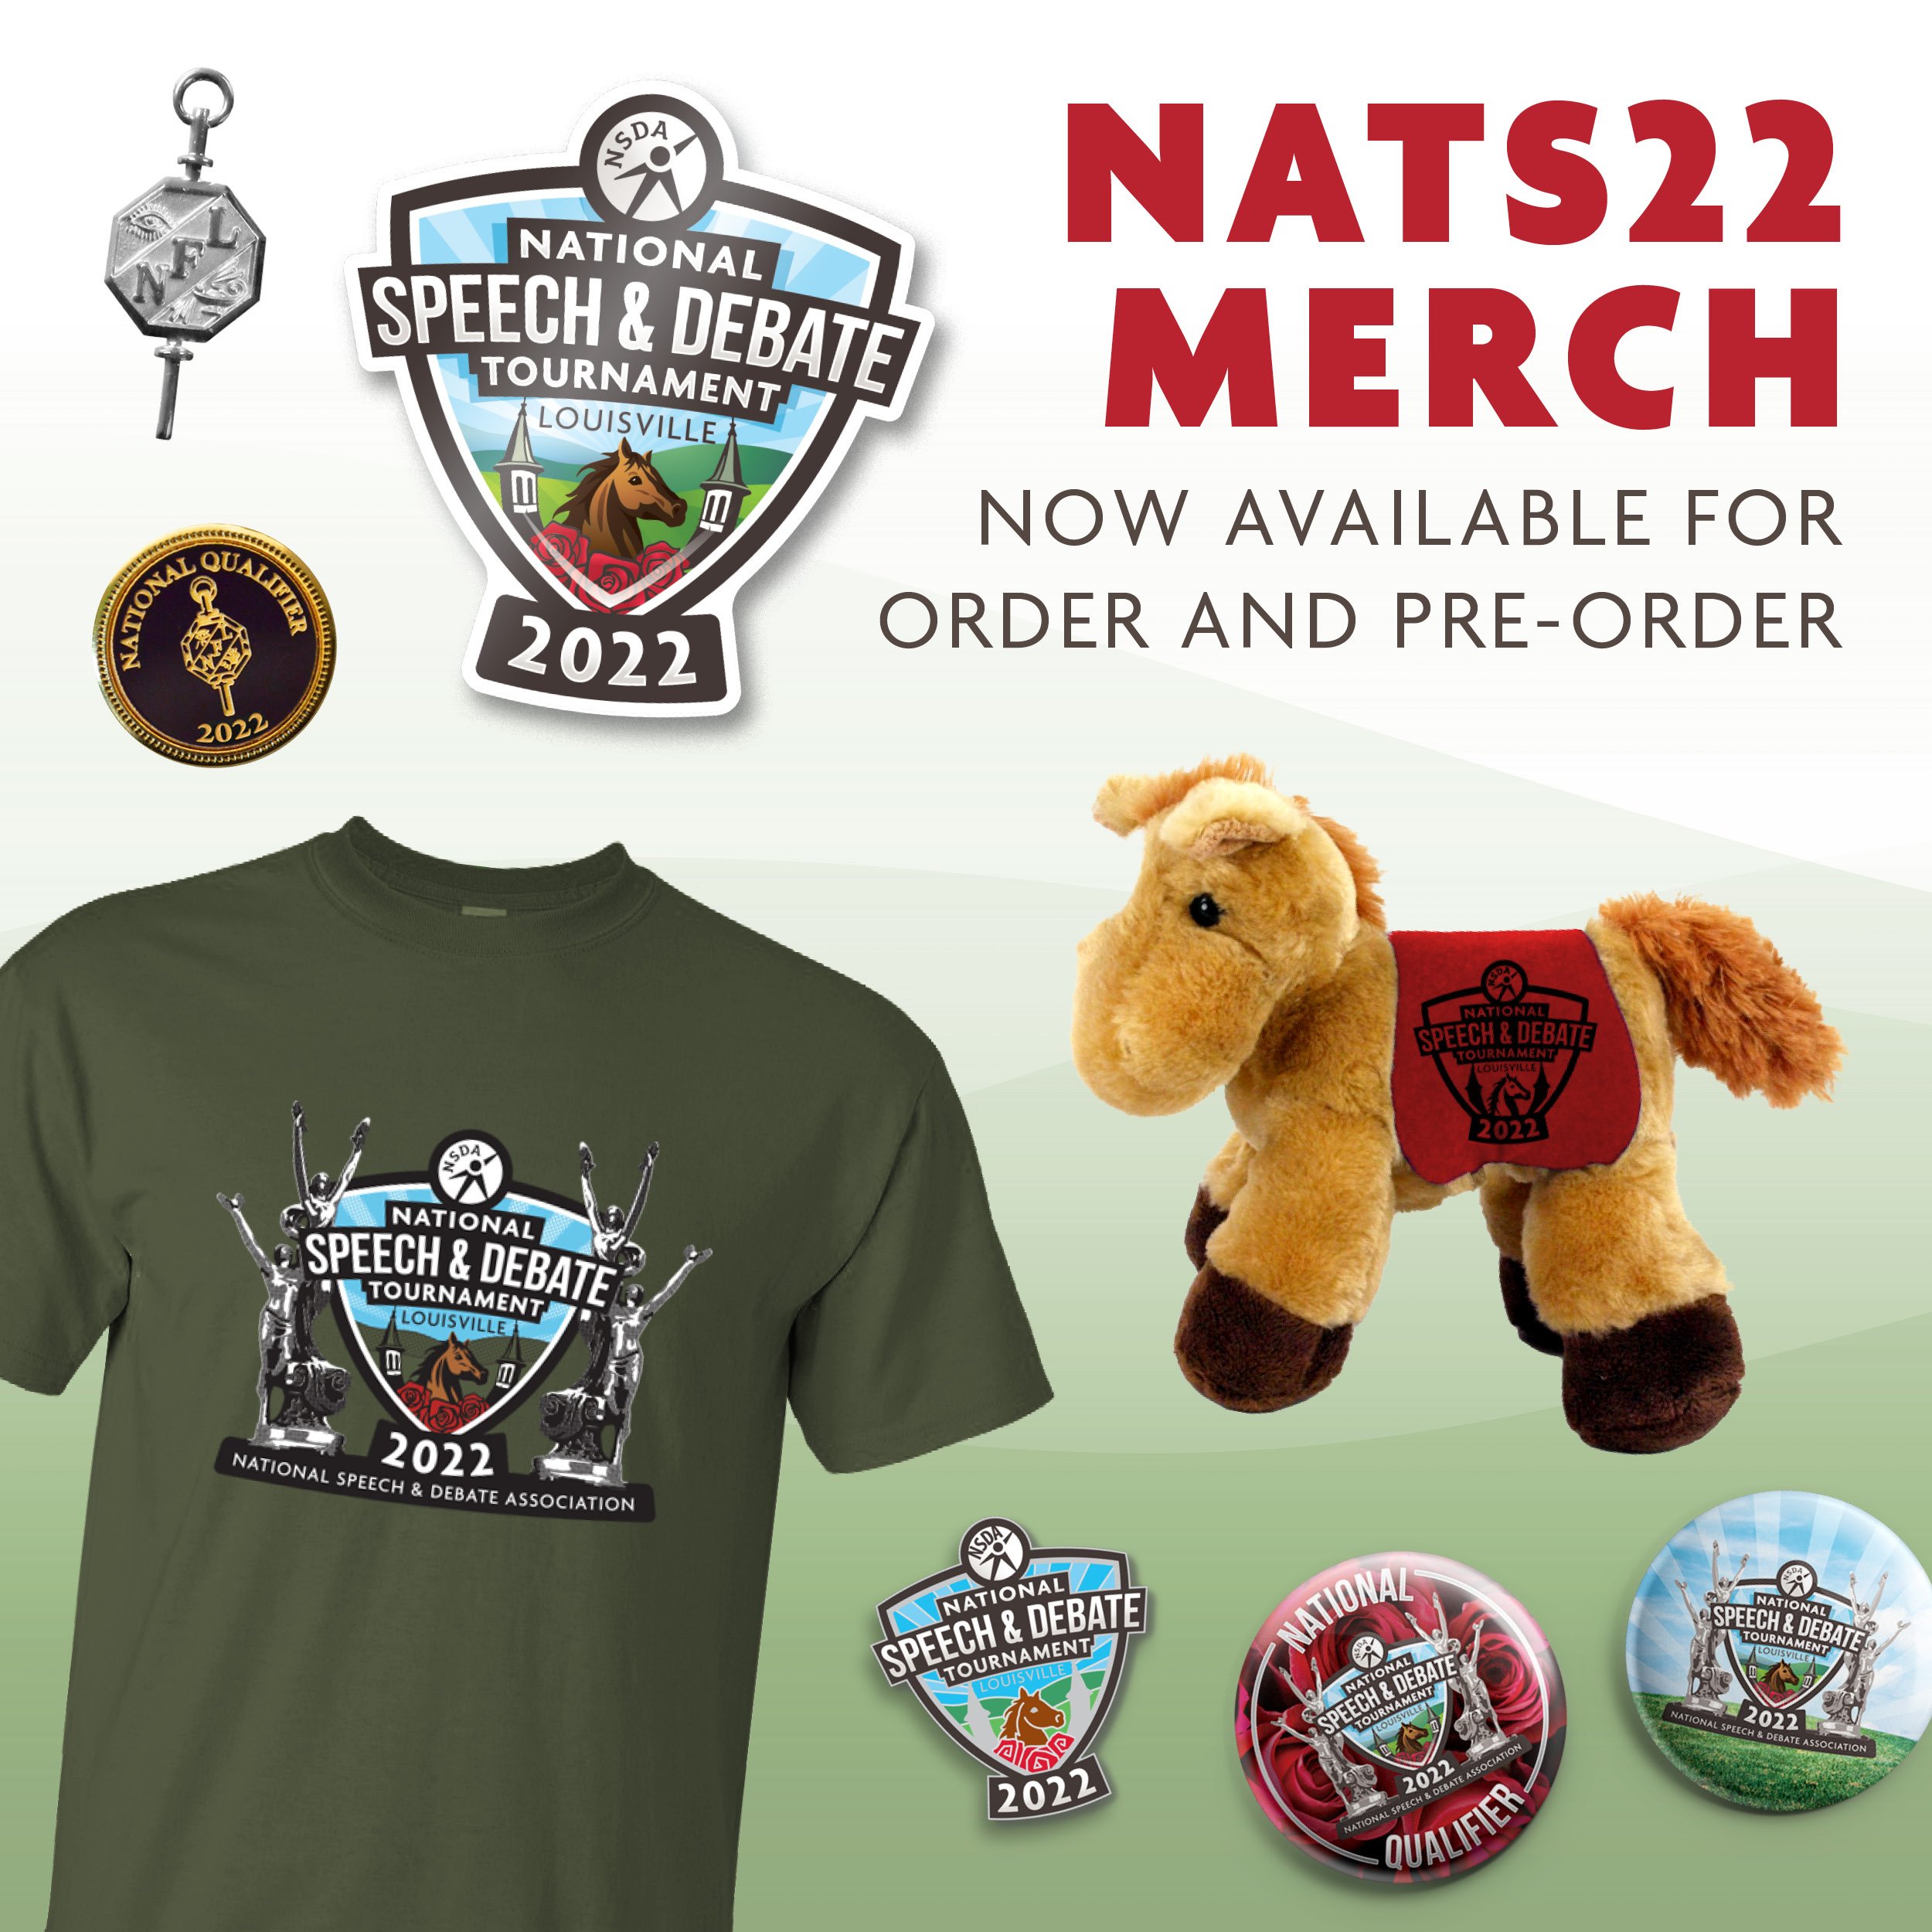 National Speech & Debate Association on X: Get the latest and greatest NSDA  #Nats22 swag when you preorder on our website! Hurry over before May 27th  to get your Nationals gear in